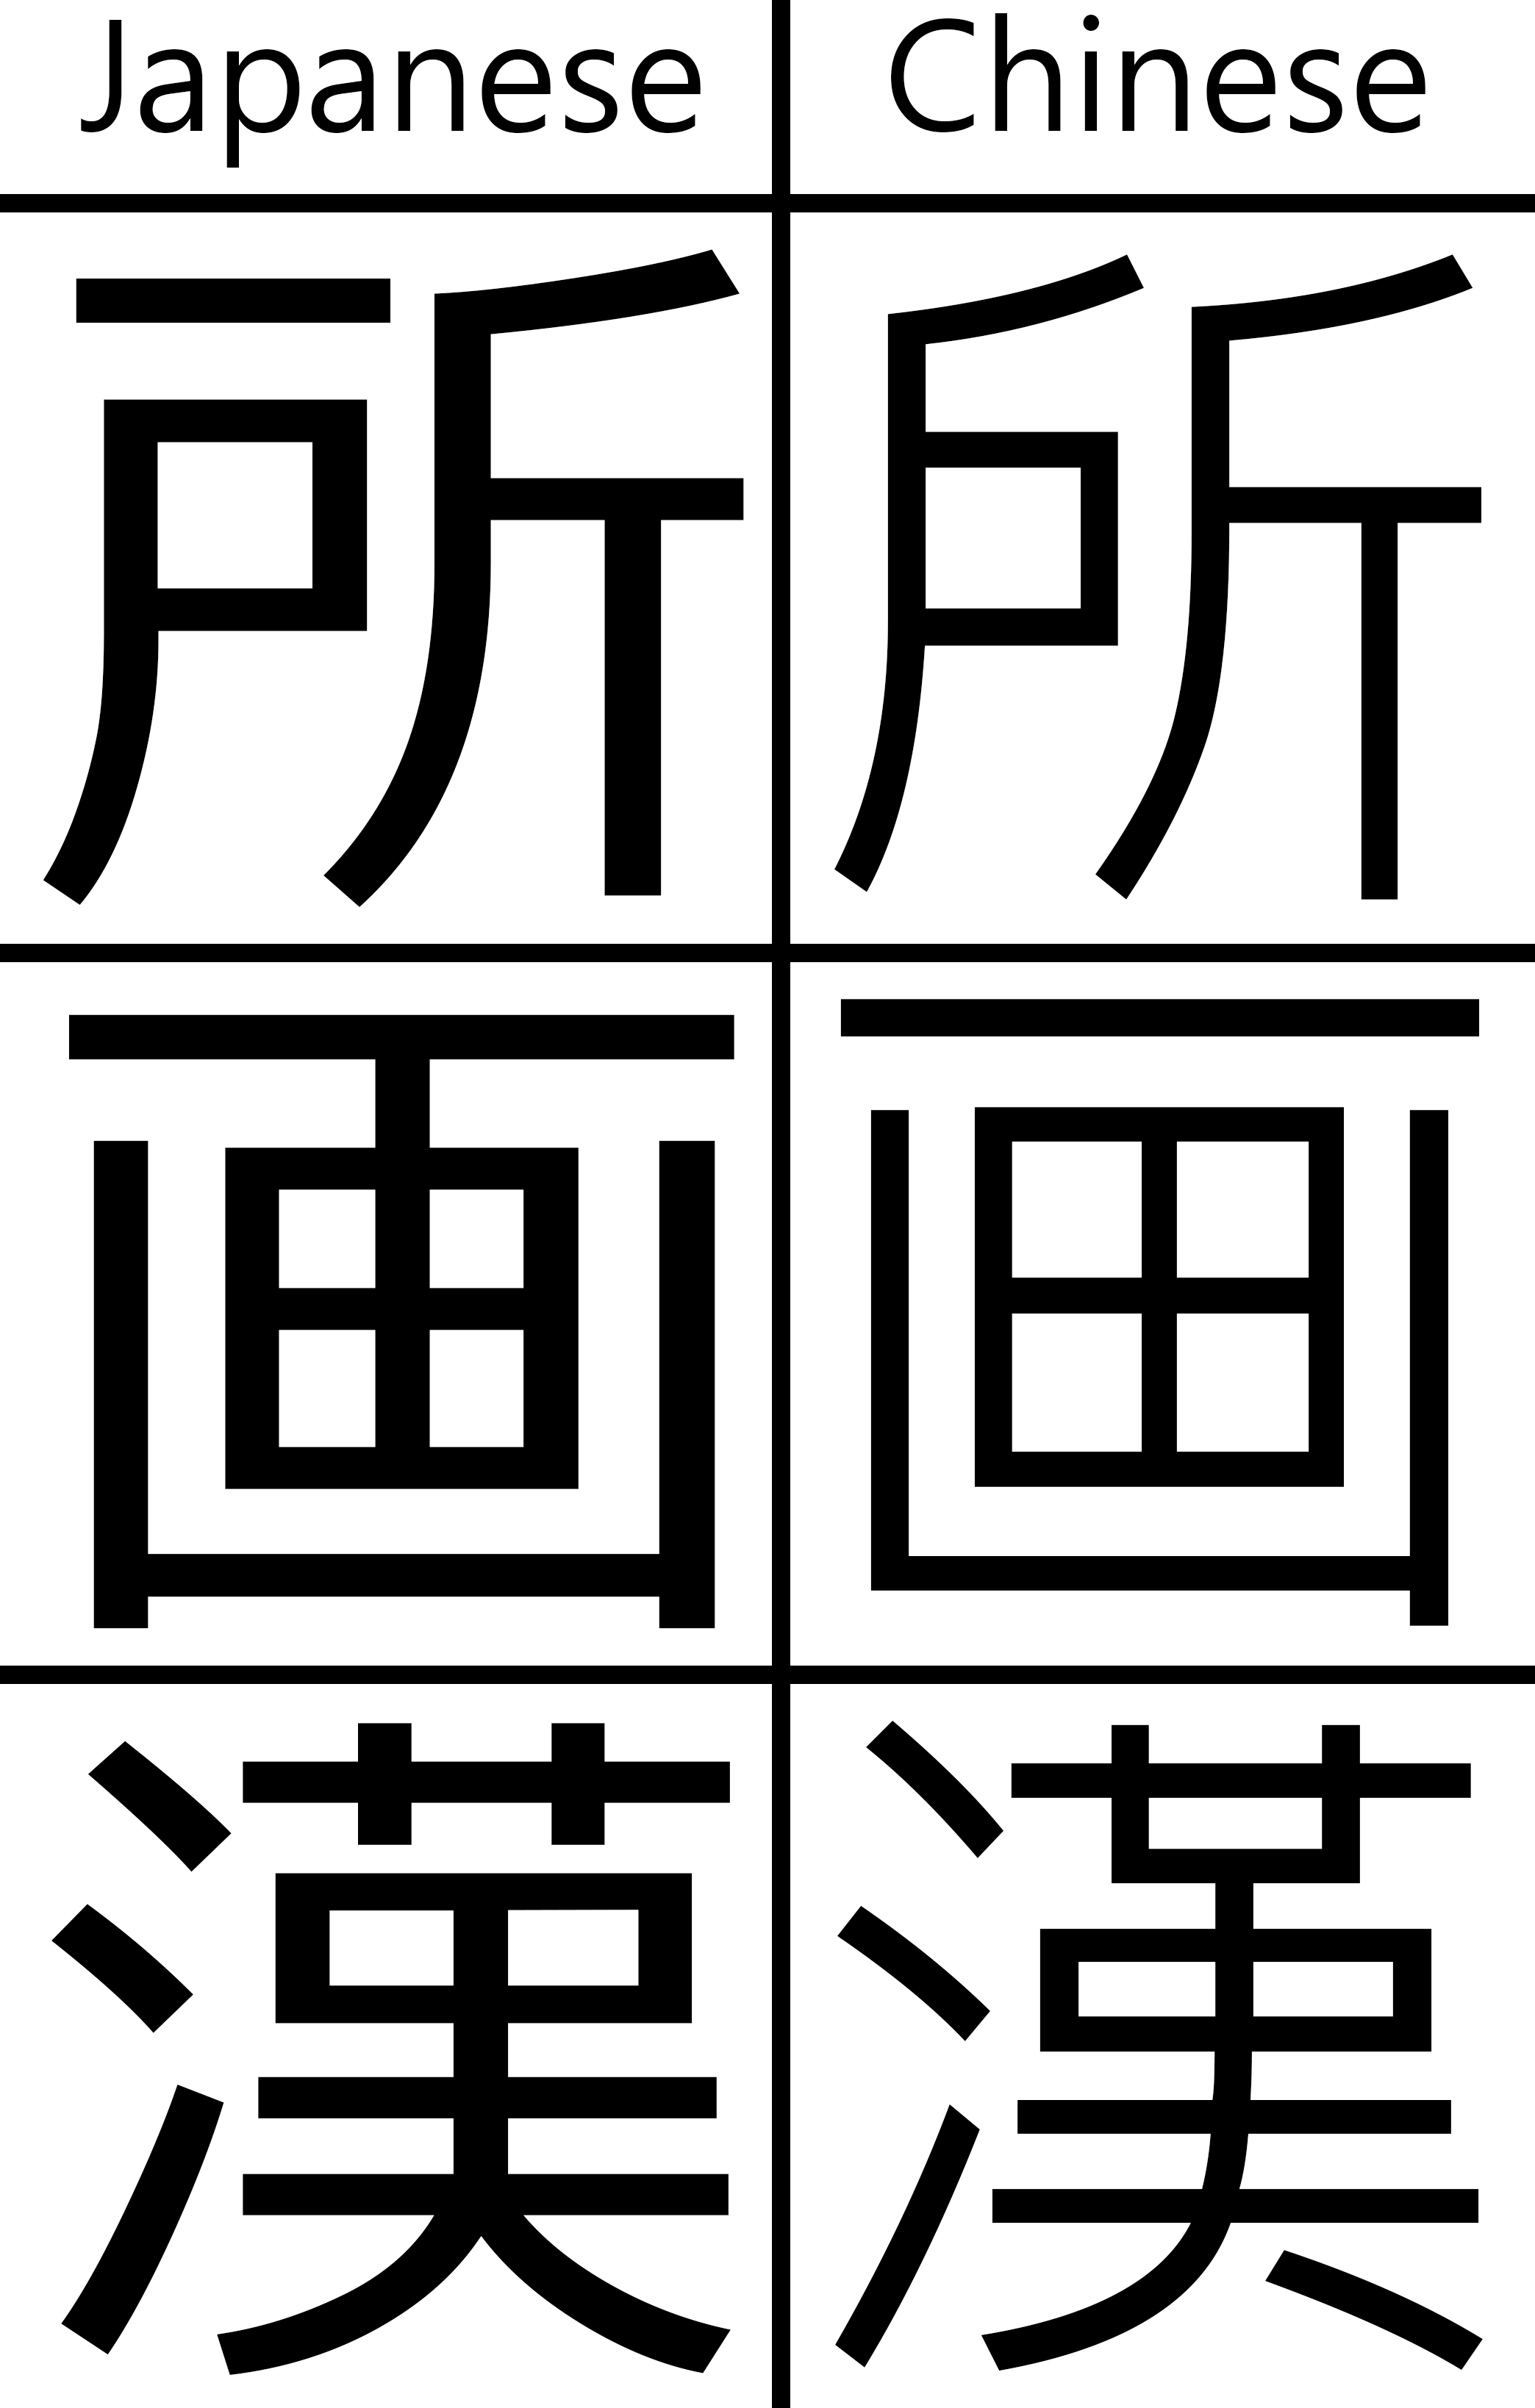 I have noticed that Japanese Kanji are written like they